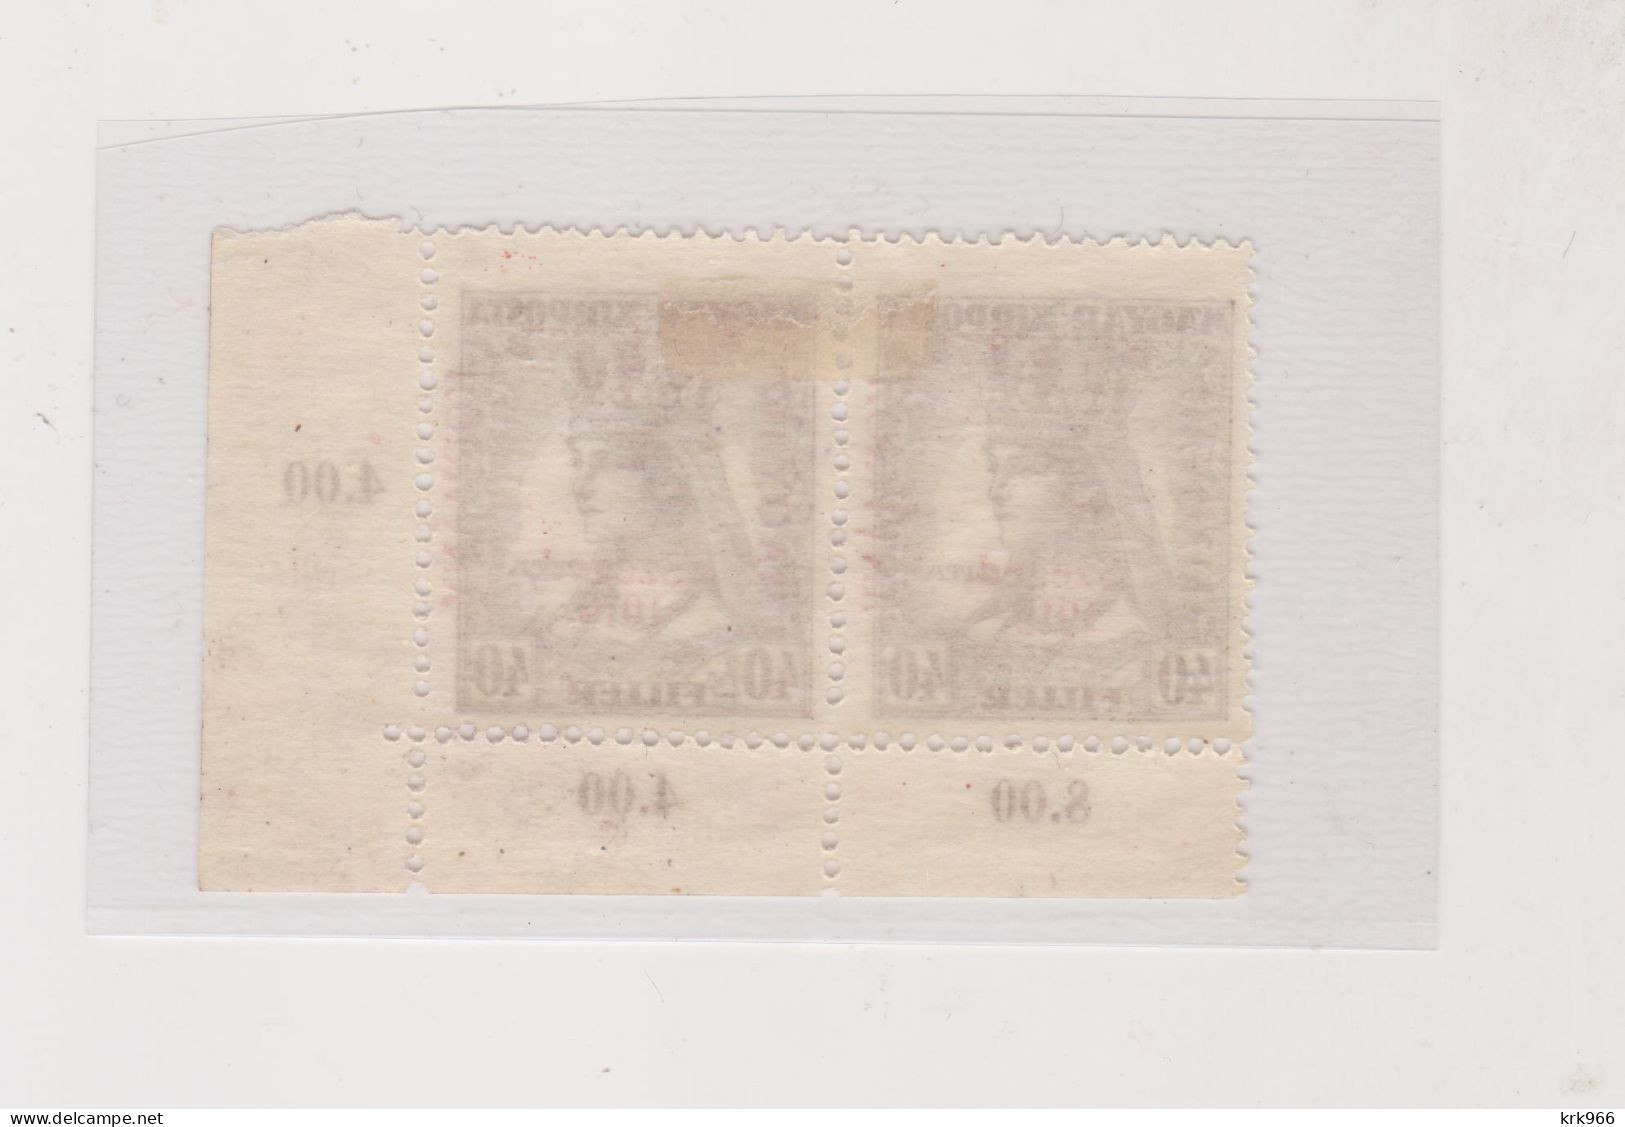 HUNGARY 1919 SZEGED SZEGEDIN Locals Mi 25 Pair  Hinged - Local Post Stamps